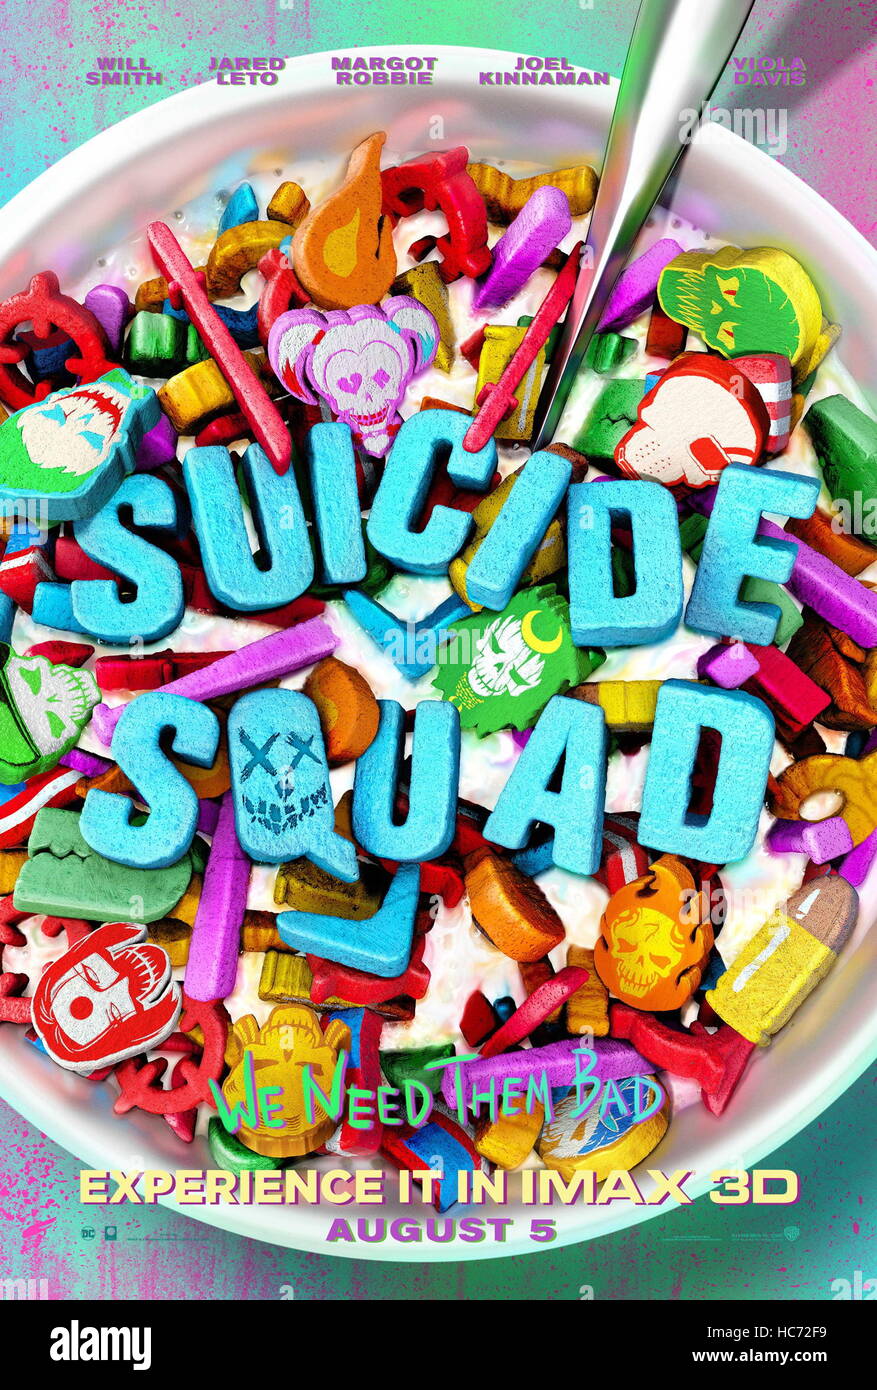 RELEASE DATE: August 5, 2016 TITLE: Suicide Squad STUDIO: Atlas Entertainment DIRECTOR: David Ayer PLOT: A secret government agency recruits imprisoned supervillains to execute dangerous black ops missions in exchange for clemency POSTER ART (Credit Image: c Atlas Entertainment/Entertainment Pictures/) Stock Photo